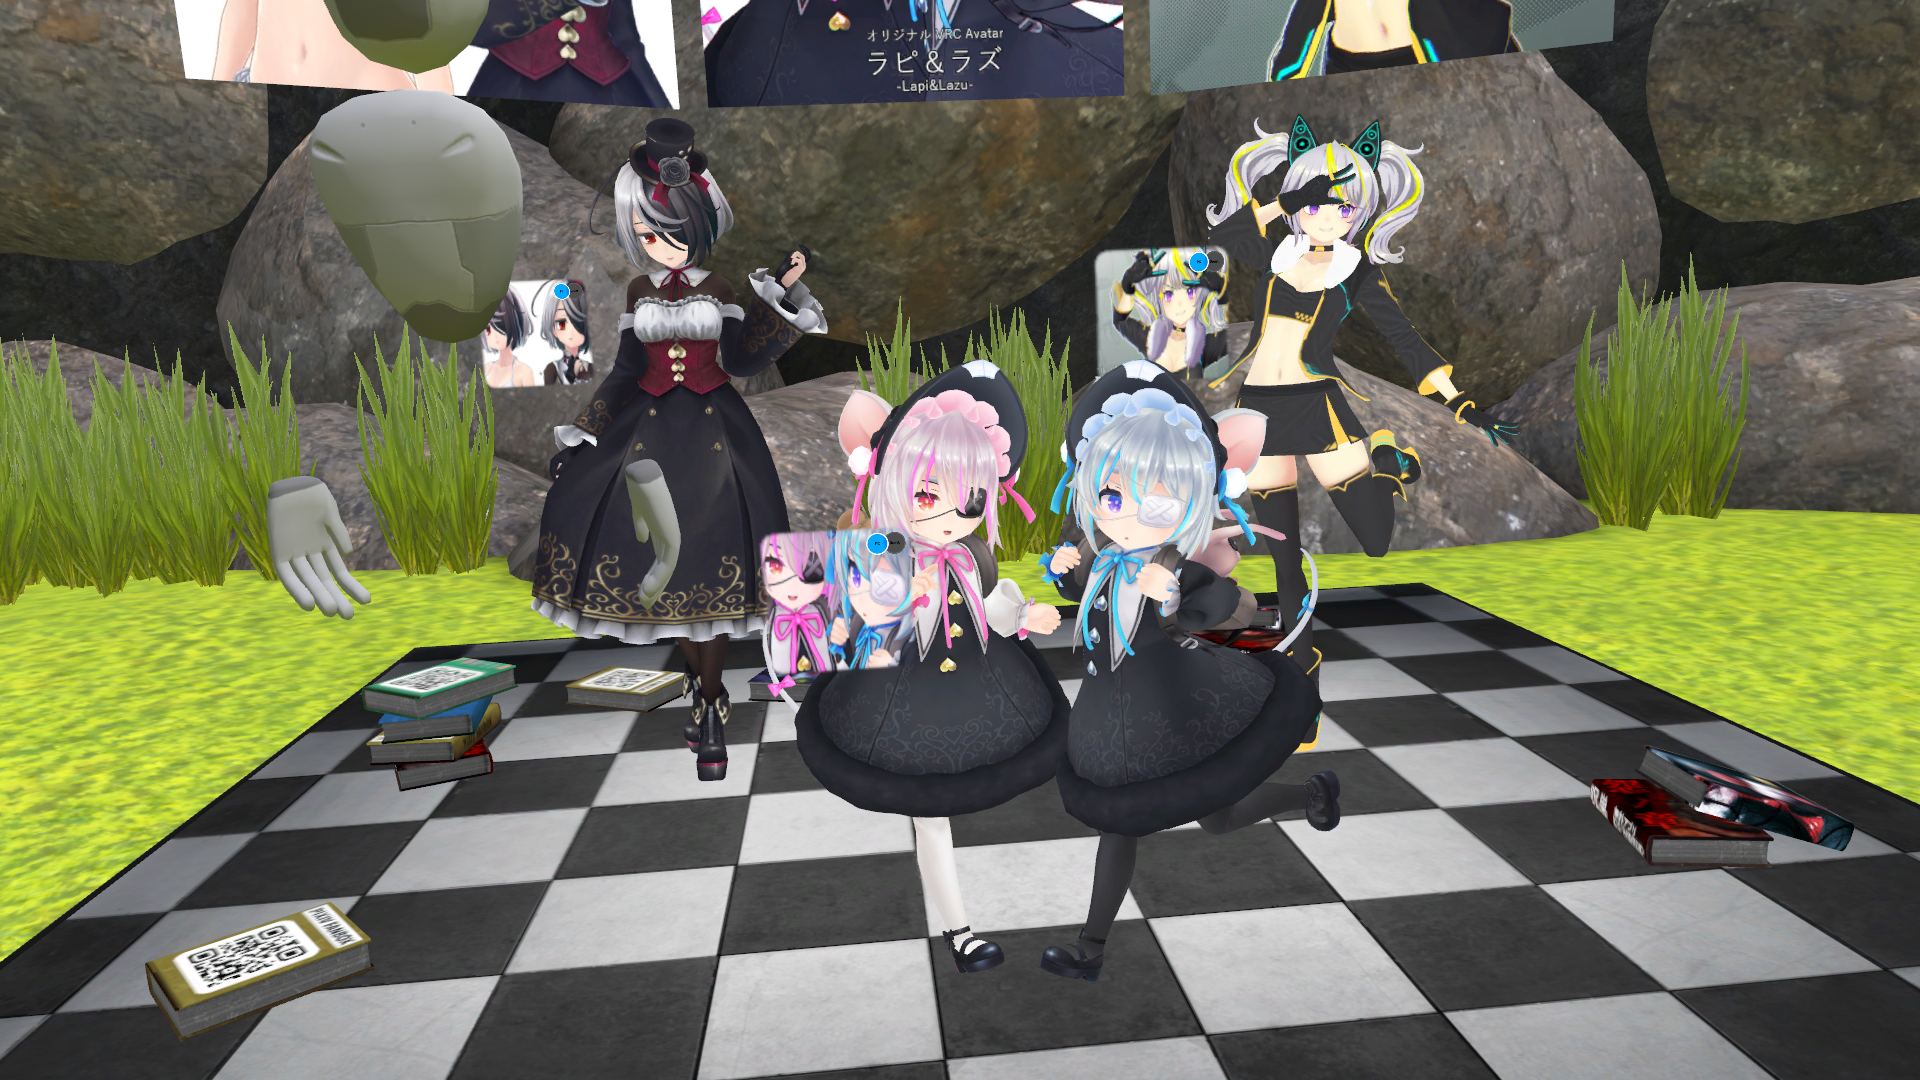 VRChat_1920x1080_2021-12-05_02-21-09.880.png